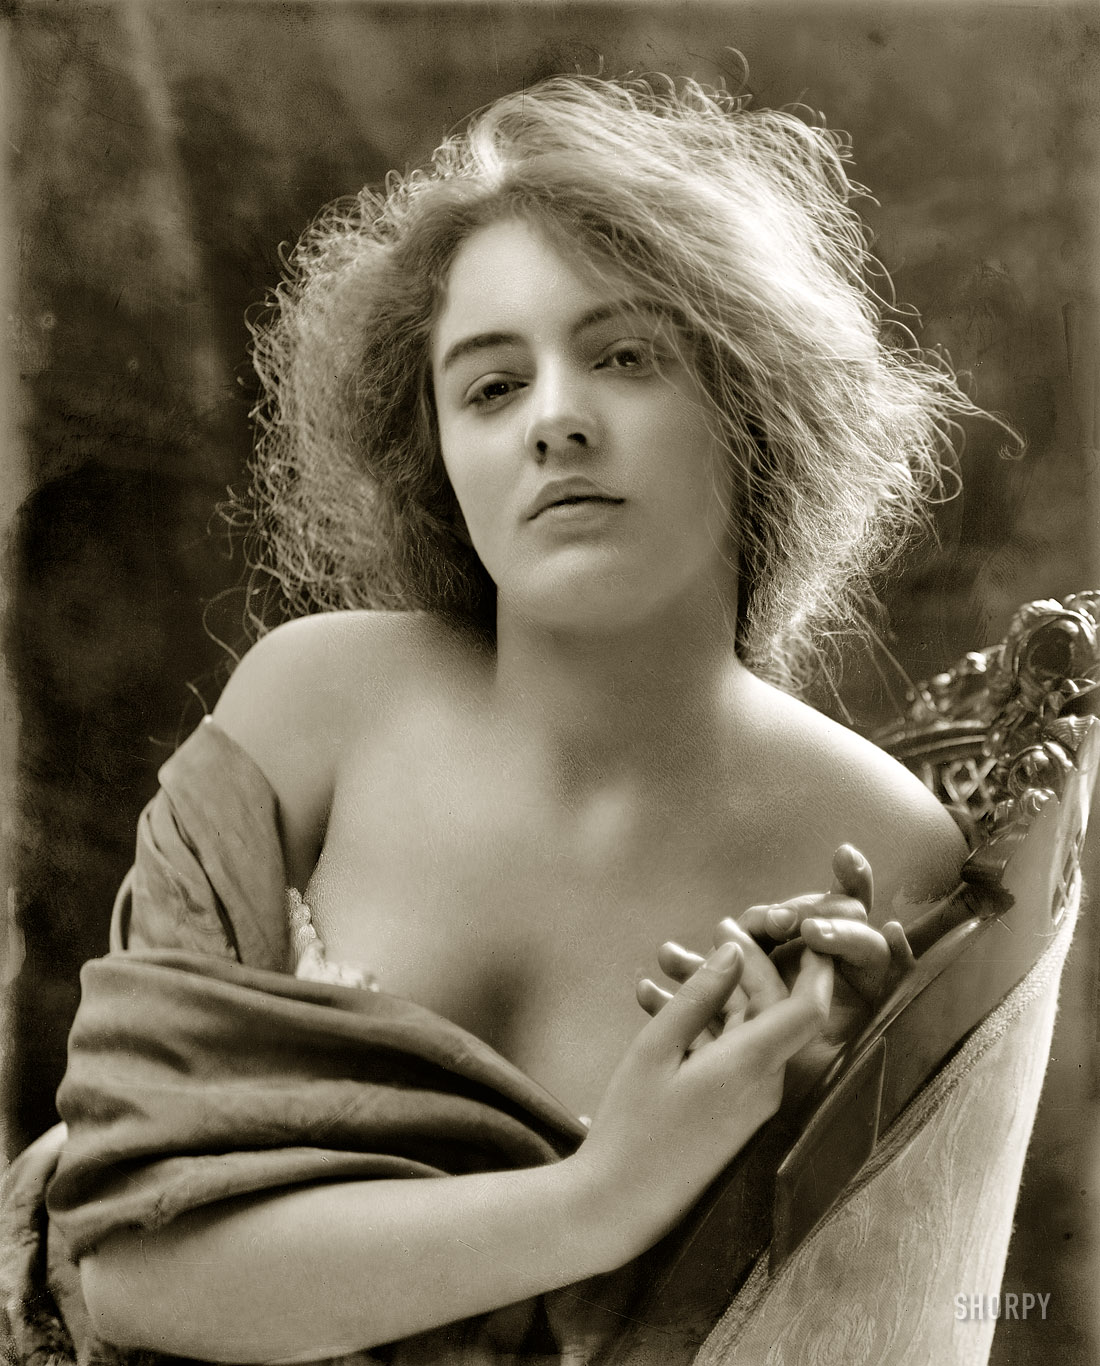 Circa 1900. "Thisbe." Who was quite the Babylonian. View full size.